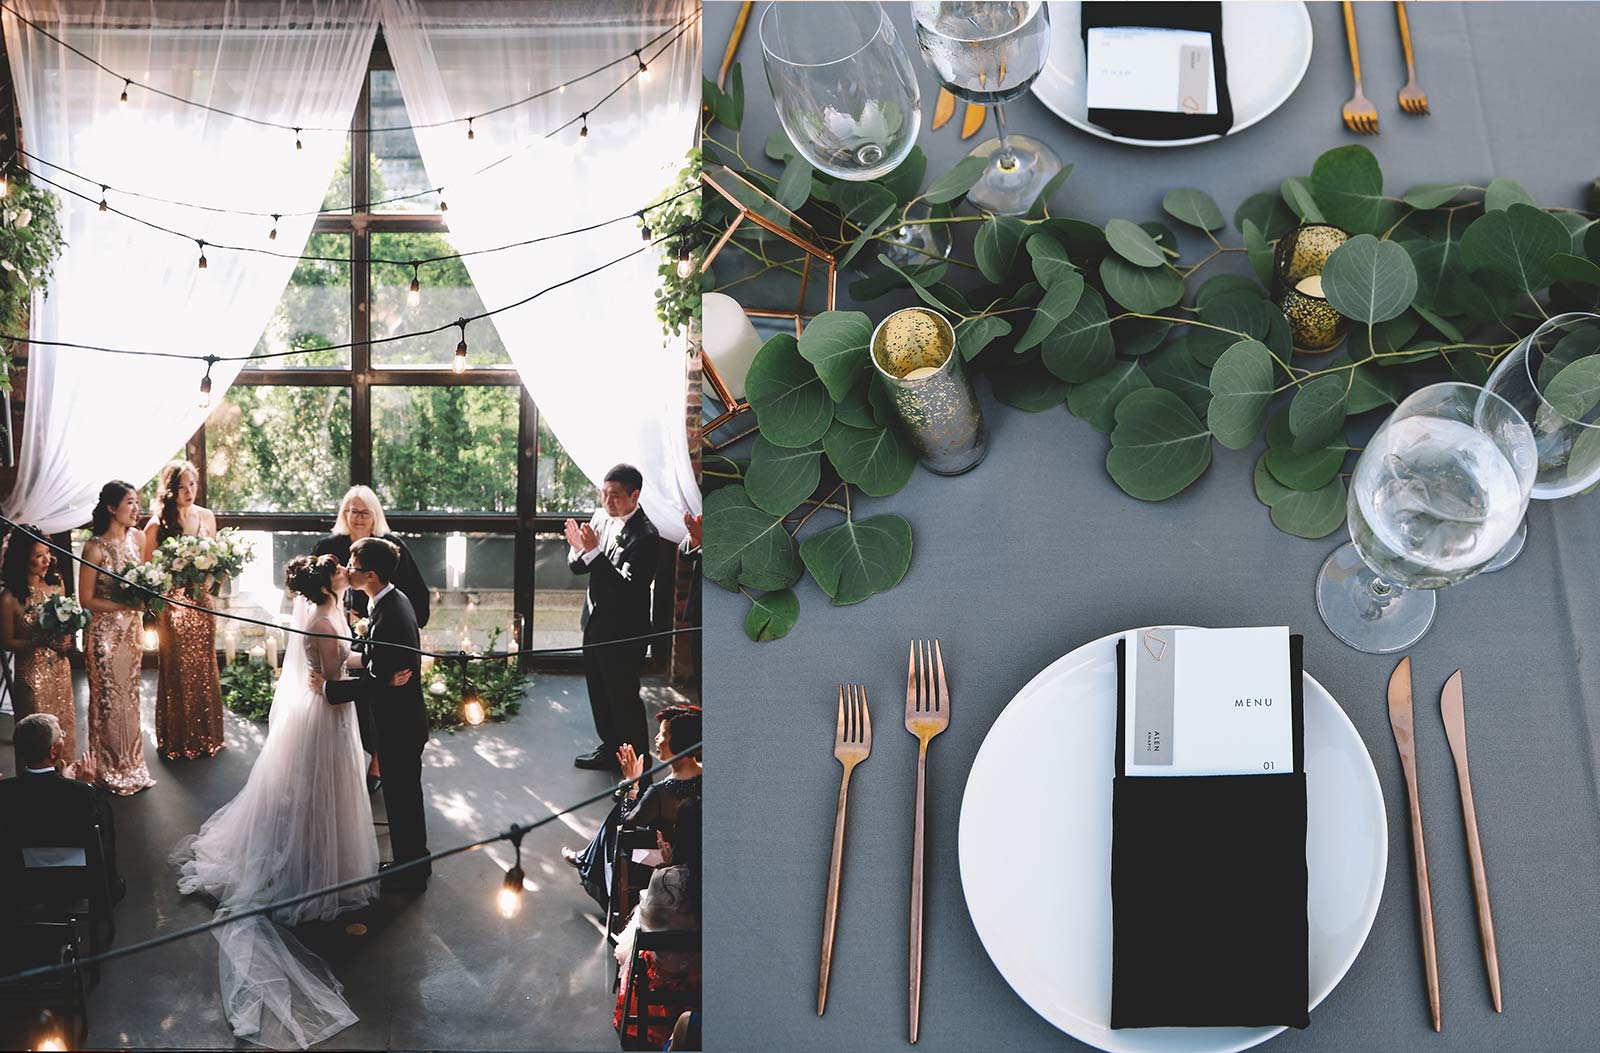 Ceremony kiss at The Foundry in LIC and preset guest table setting